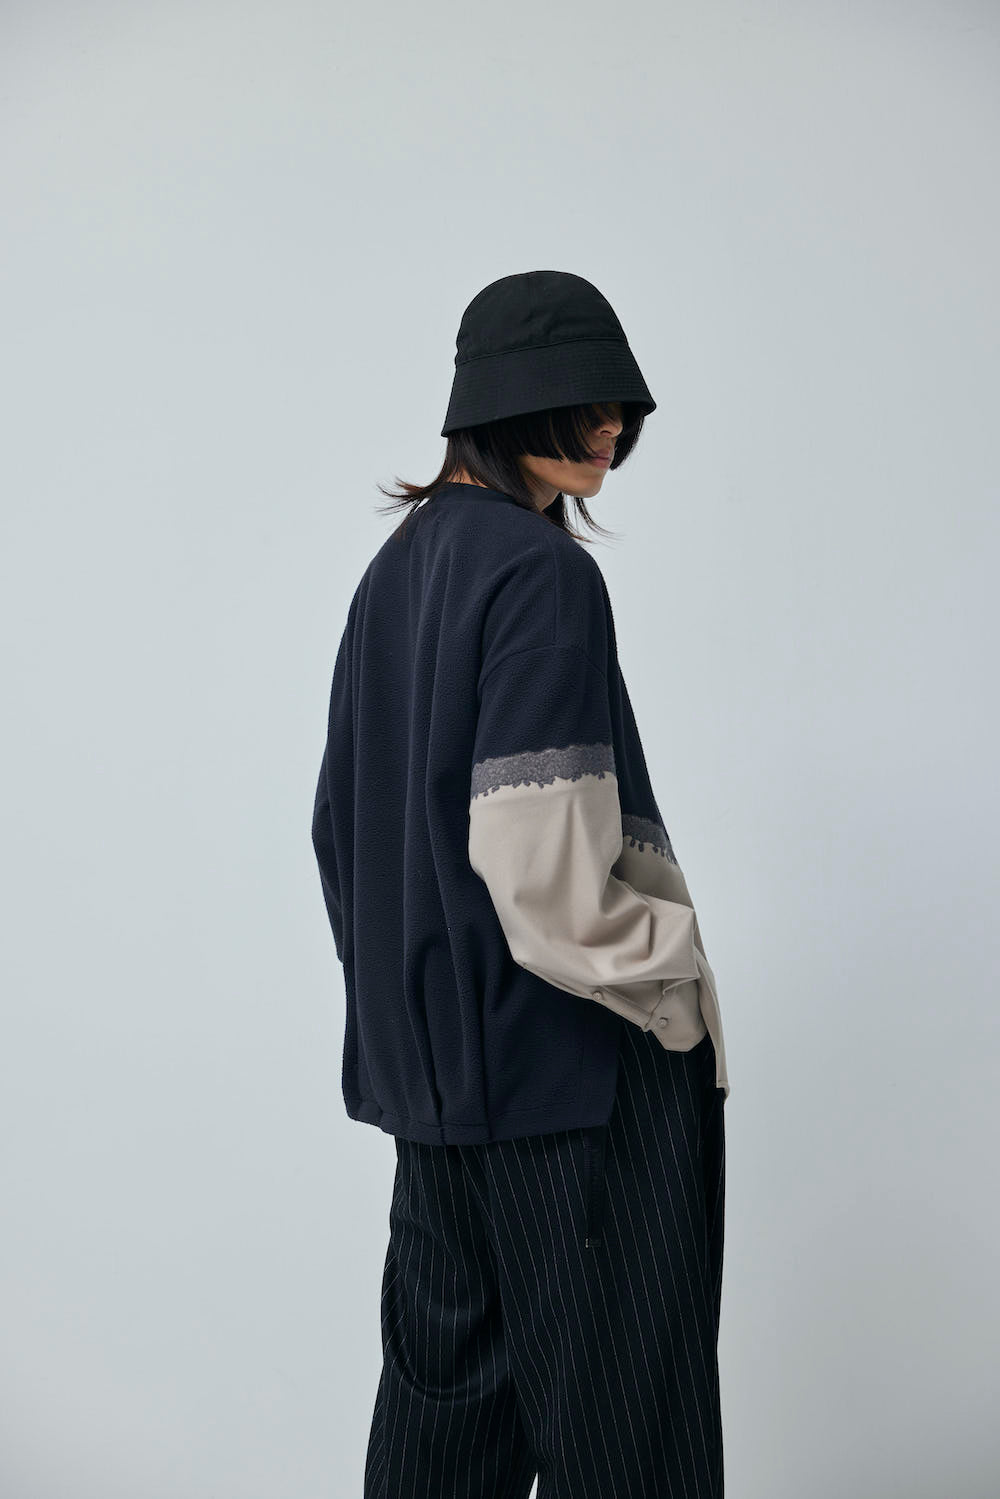 LB23AW-PO01-NDP-PL | Needle punch docking pullover | WOOD×BLACK